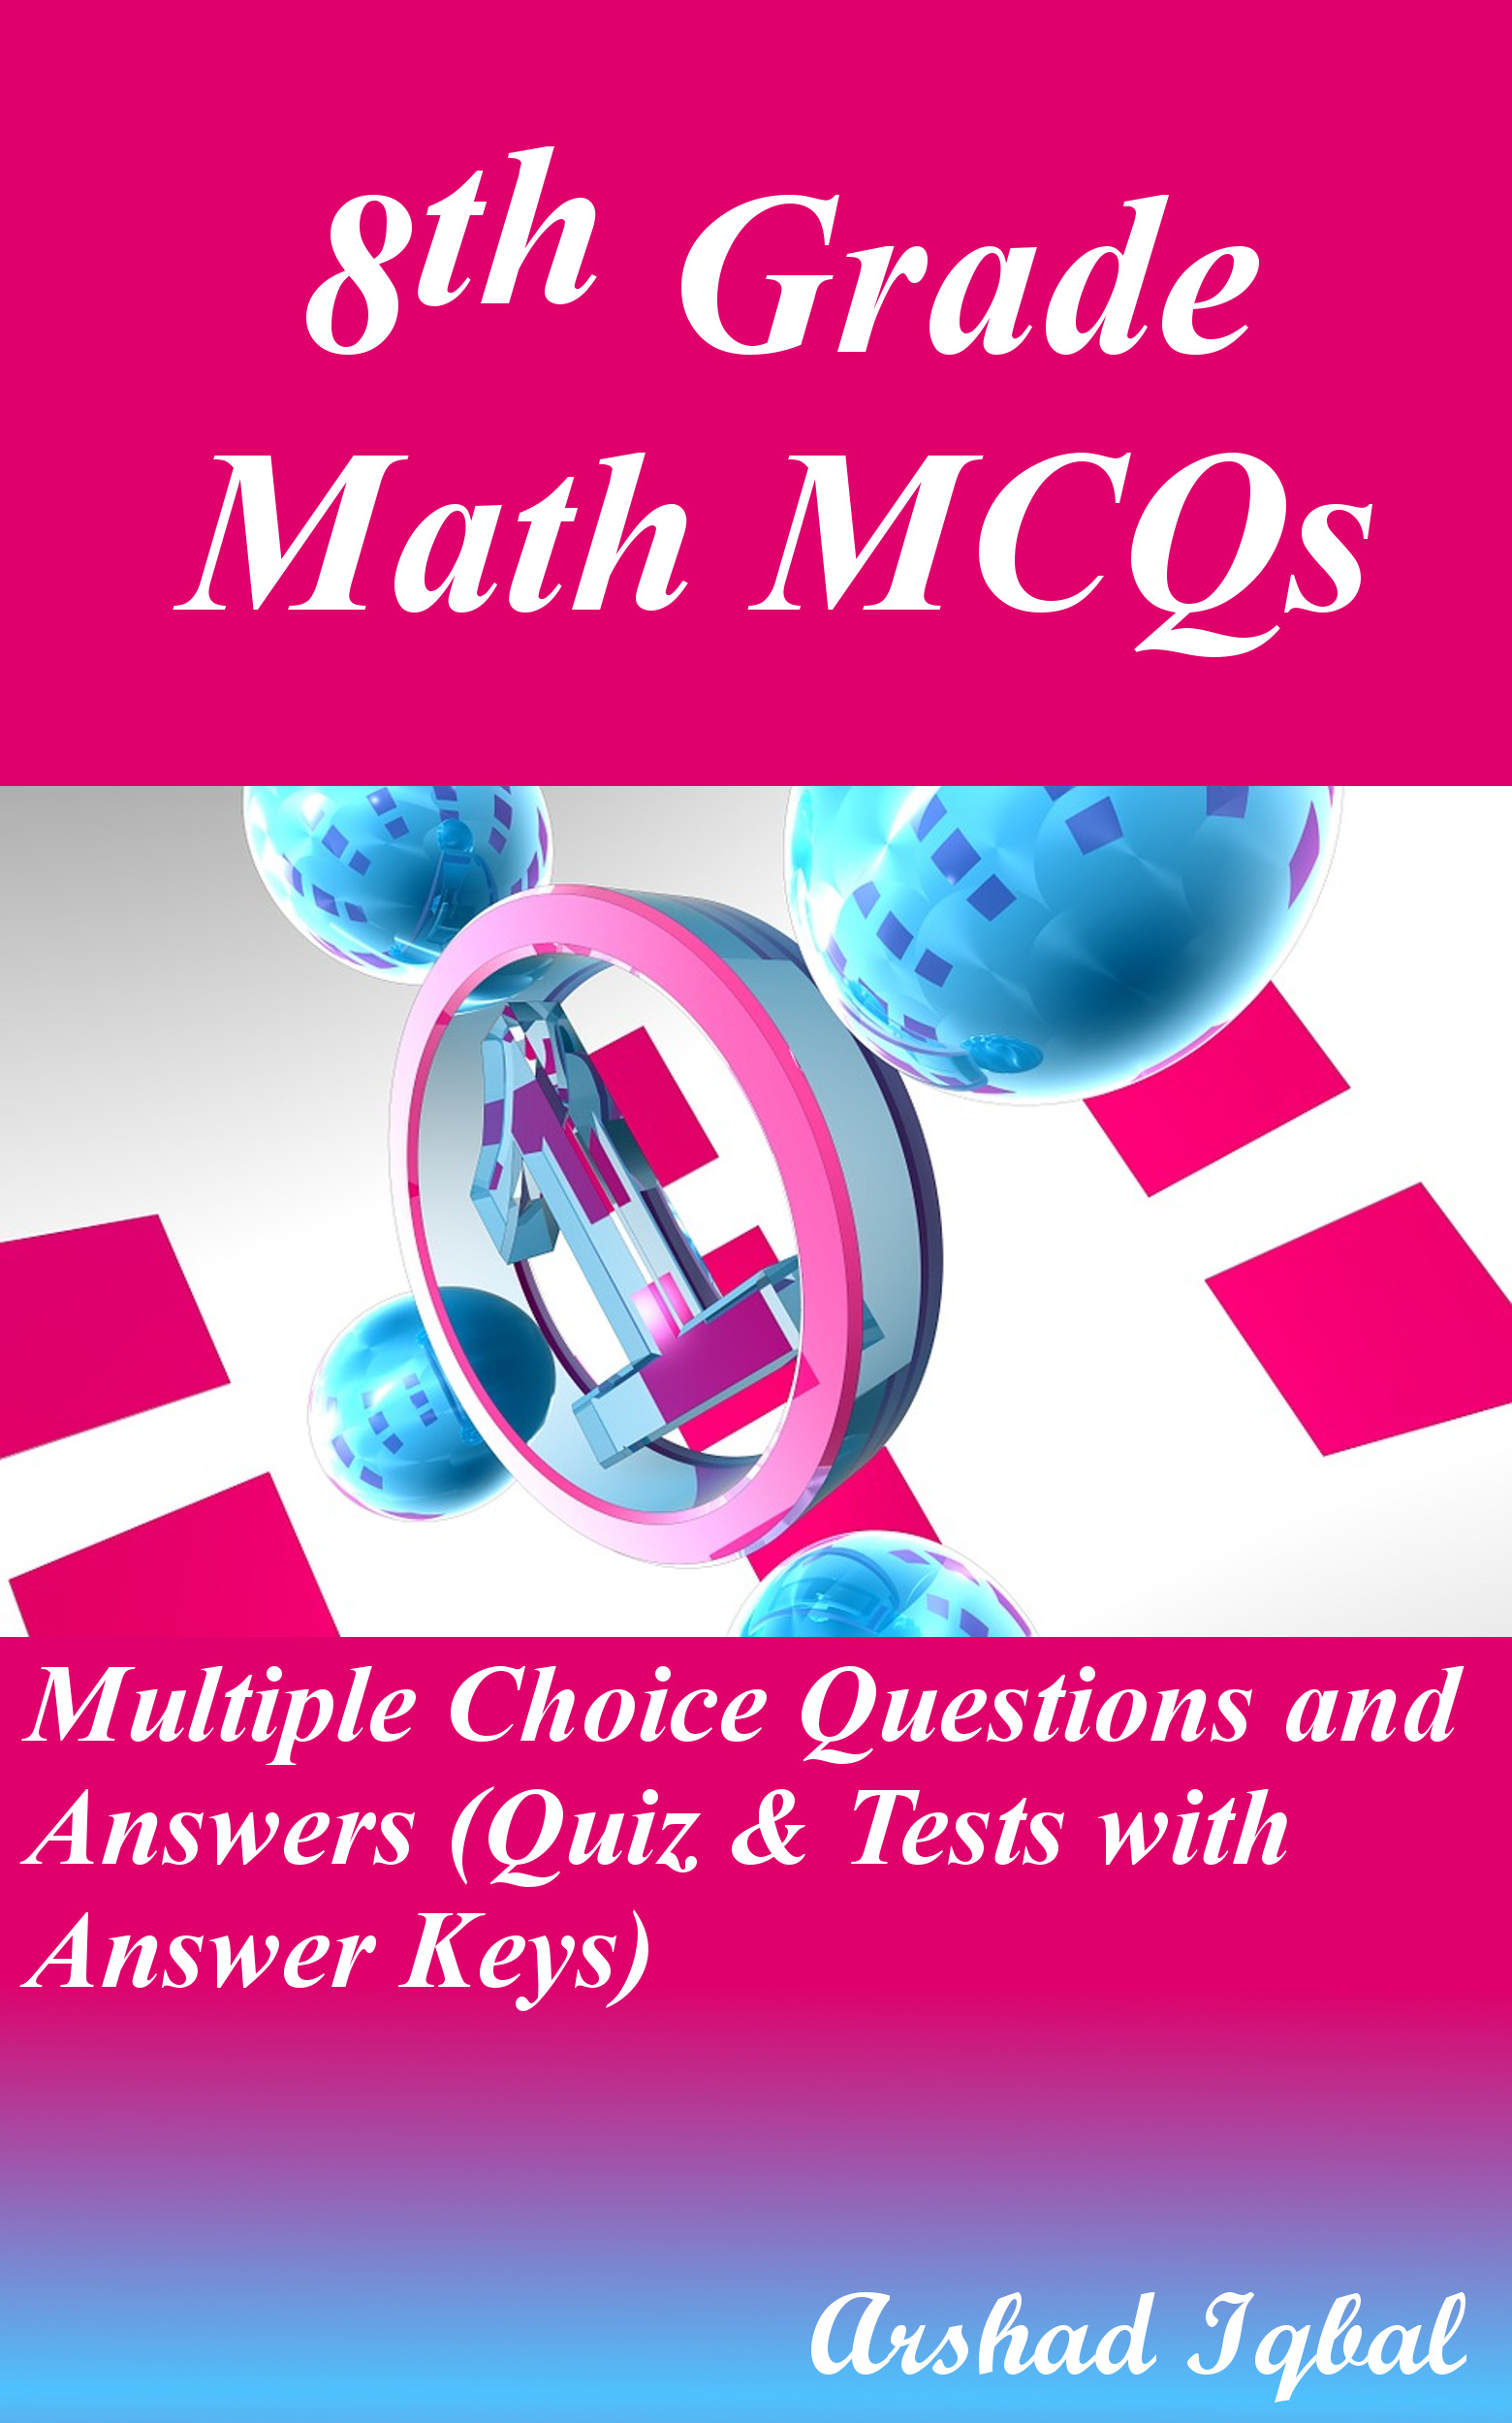 linear-inequalities-mcq-questions-and-answers-online-8th-grade-math-quiz-2